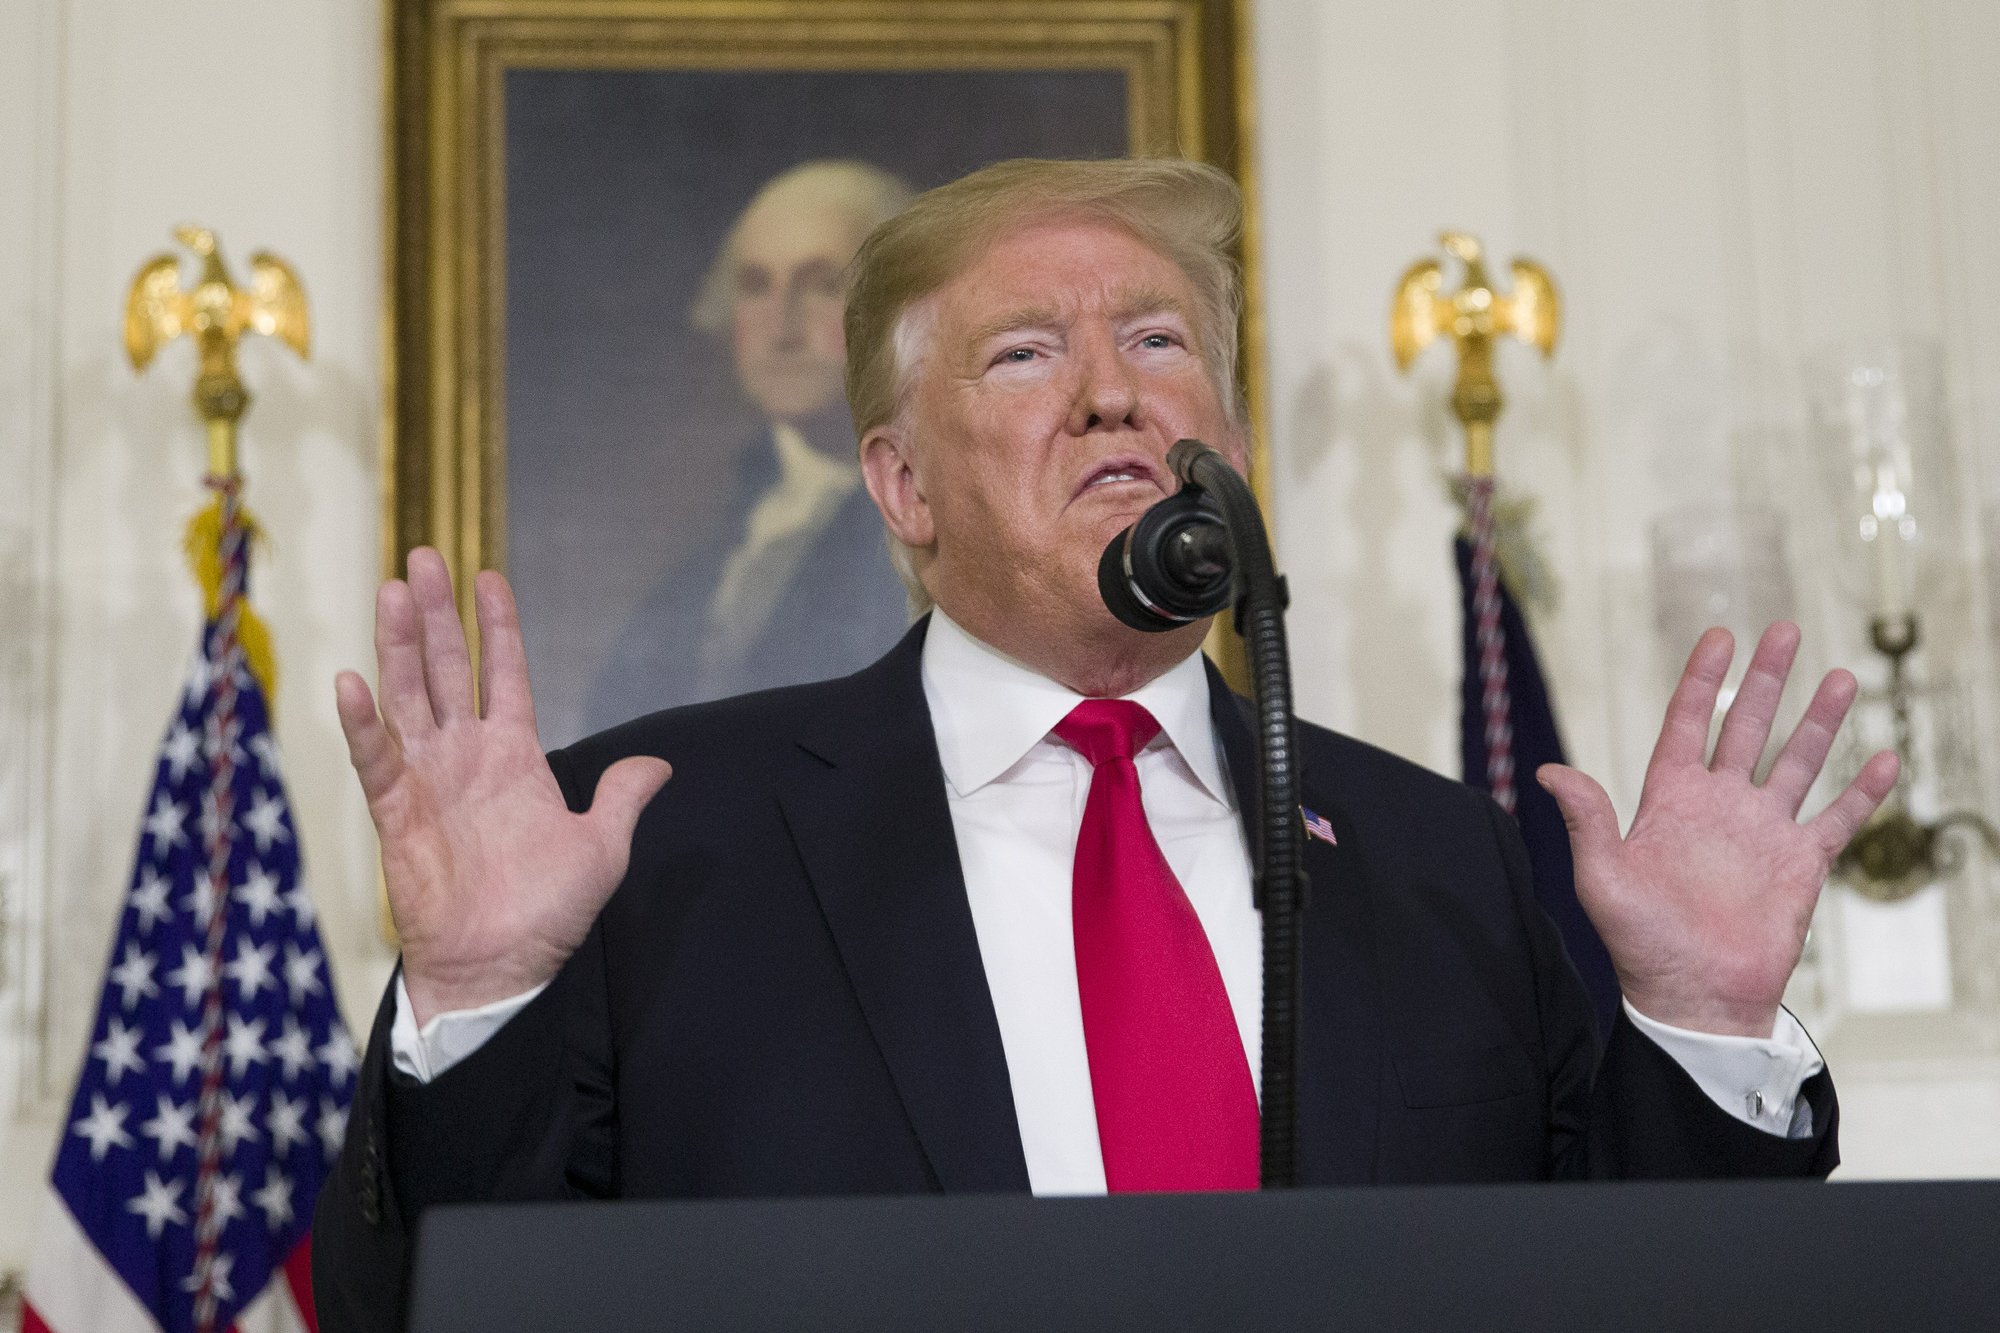 President Donald Trump speaks about the partial government shutdown, immigration and border security in the Diplomatic Reception Room of the White House, in Washington, on Saturday, Jan. 19, 2019. Photo: AP